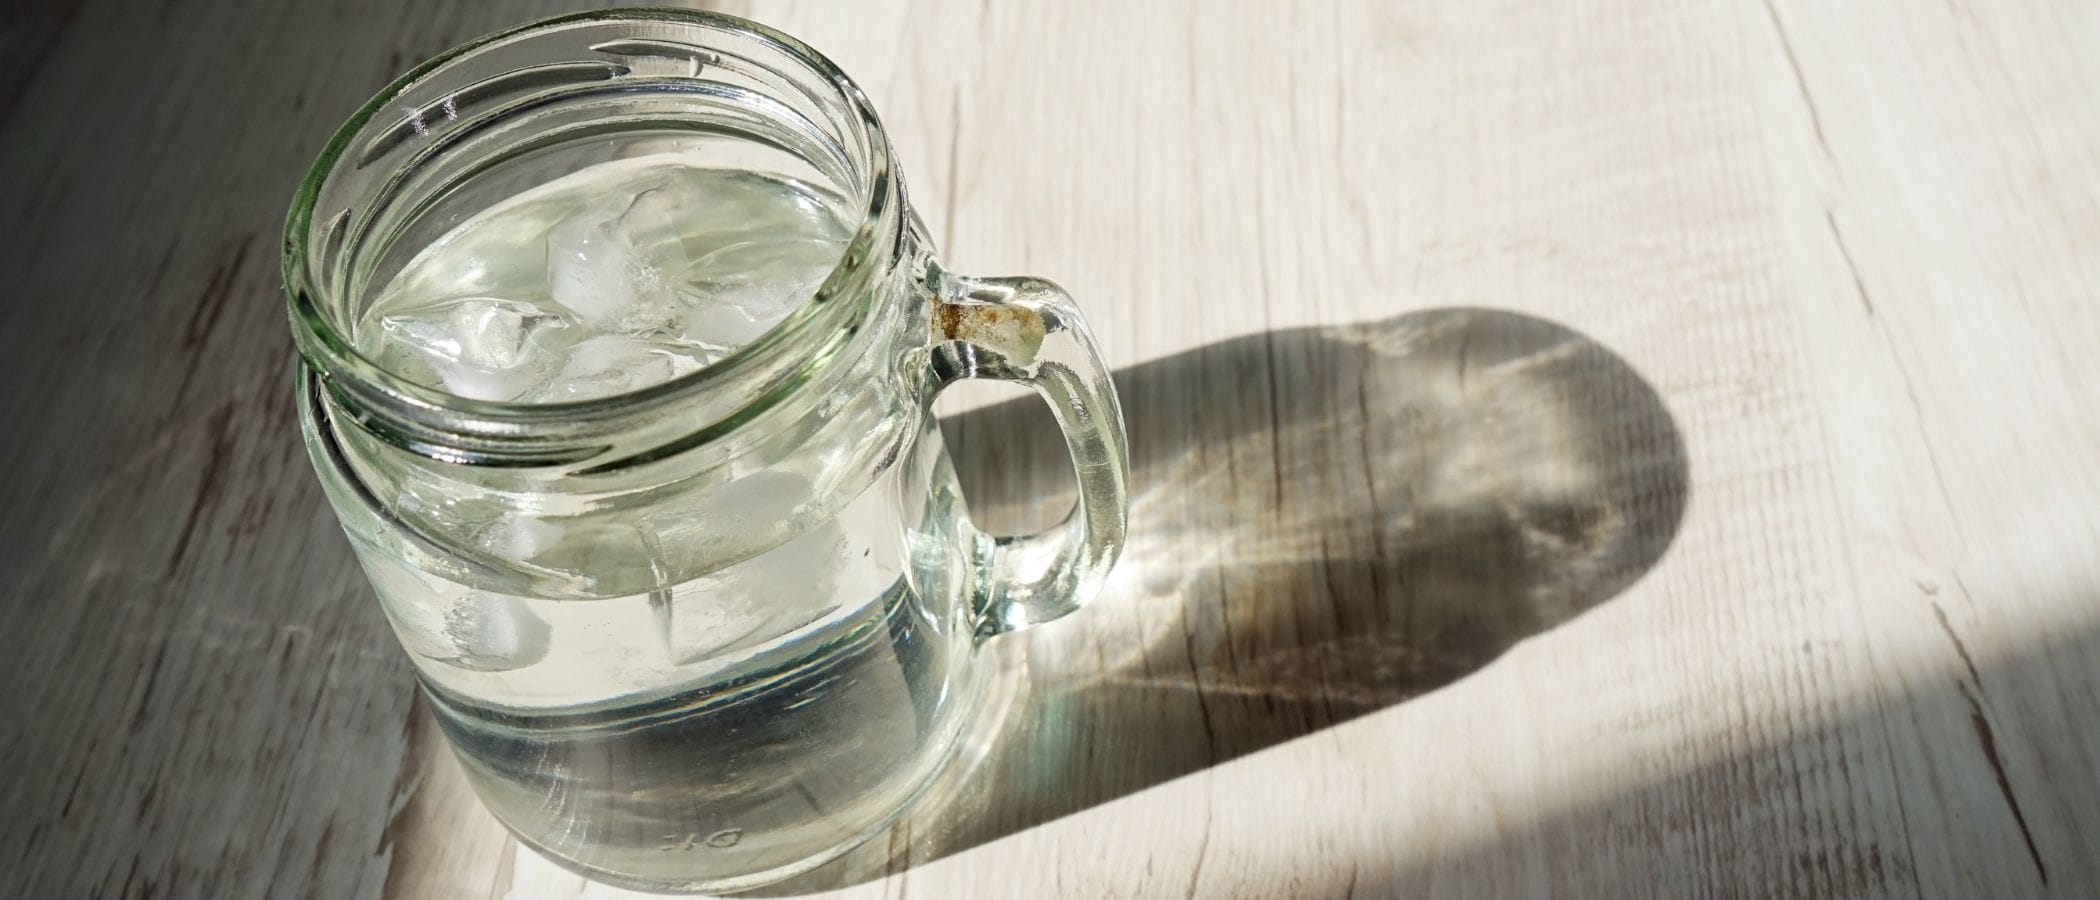 Should you drink warm or cold water when you wake up? Experts weigh in